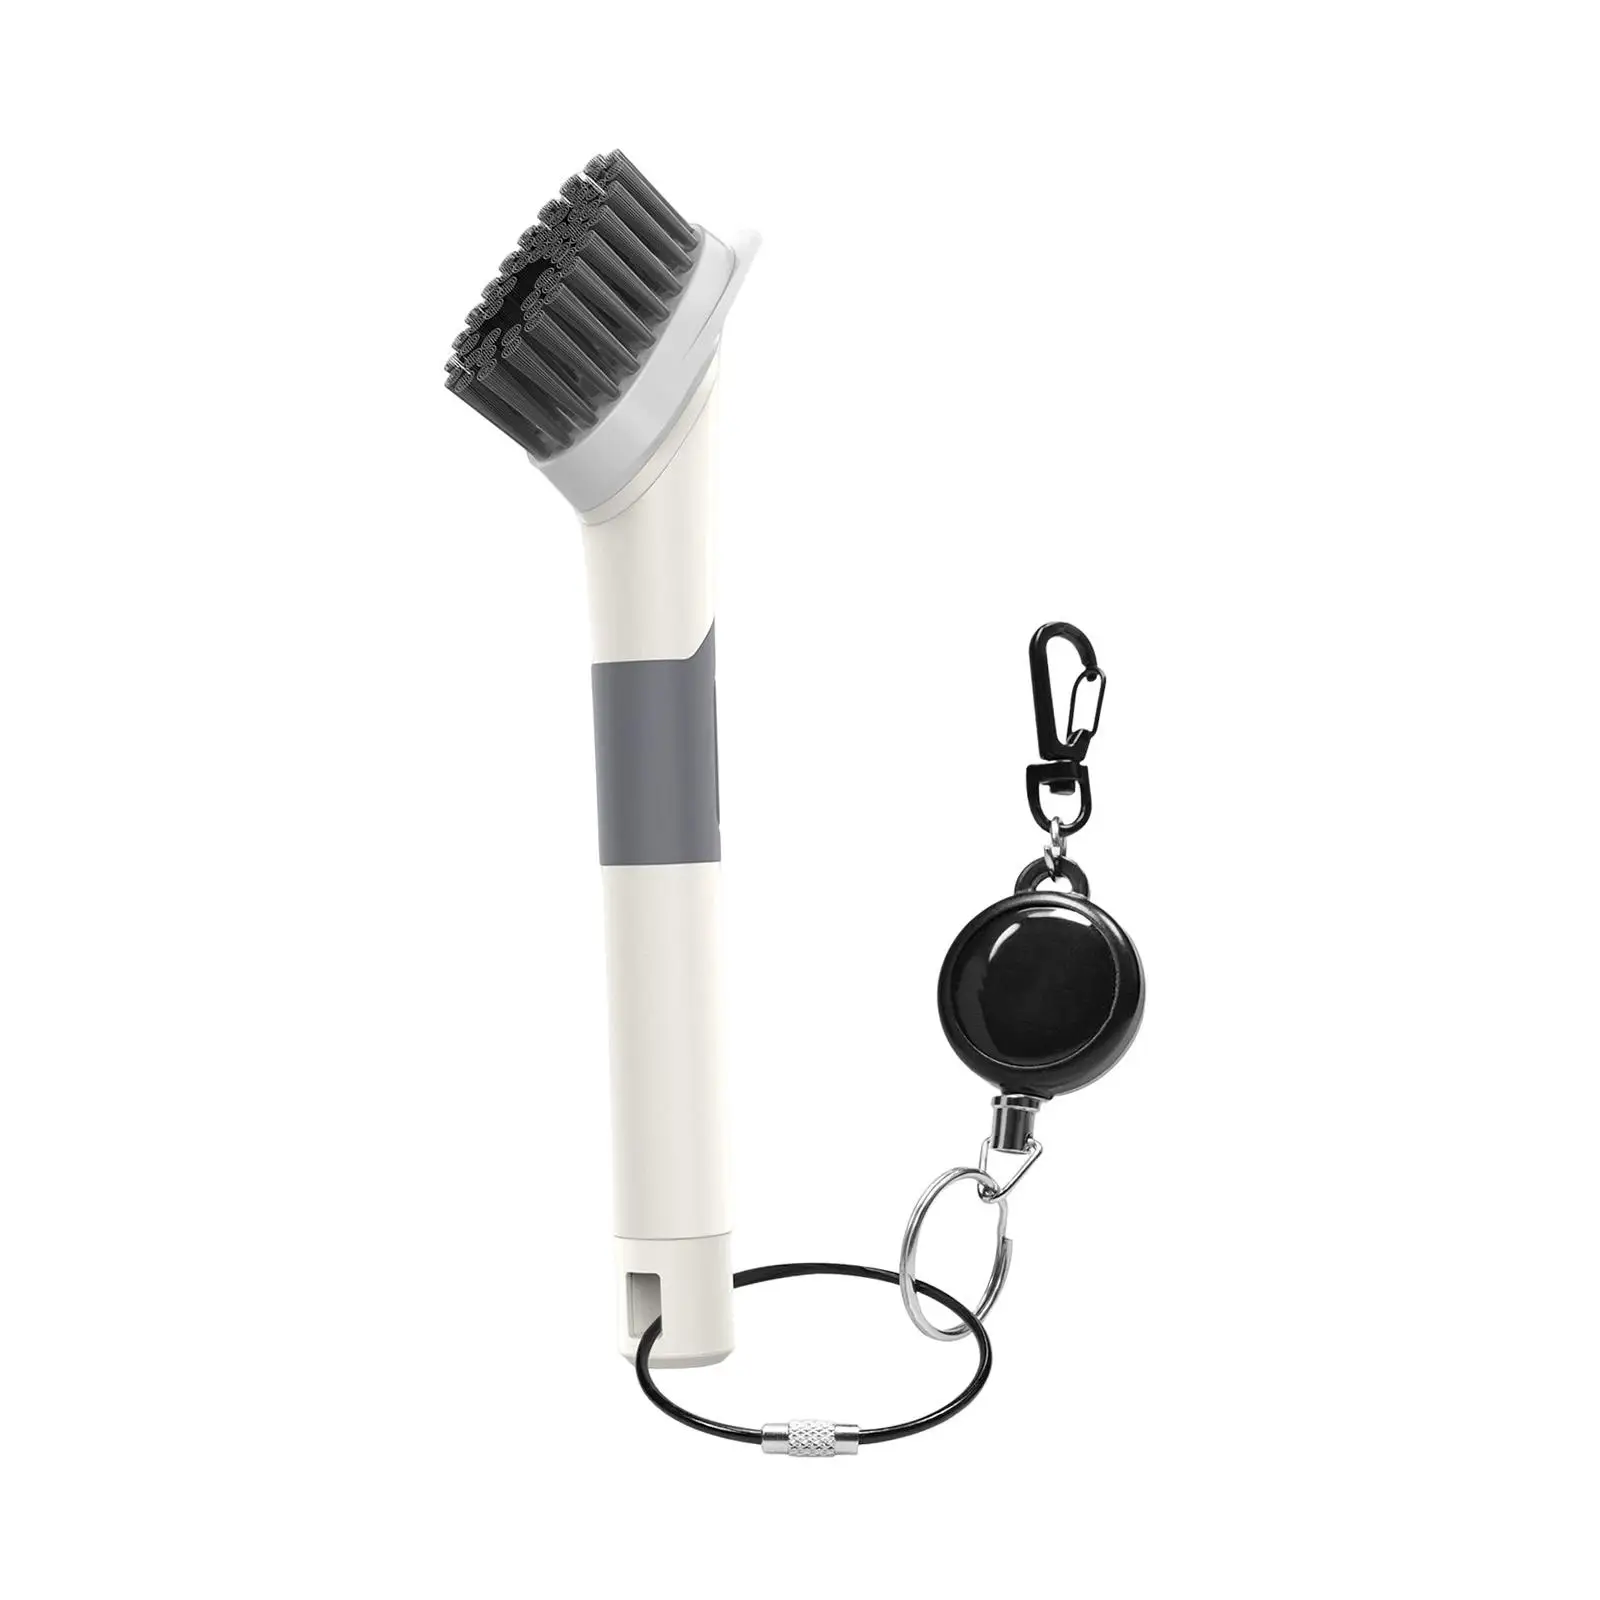 Golf Club Cleaner Cleaning brushes easy Cleaning Accessories Golf Club Groove Cleaner Nylon Bristles for Golf Gifts